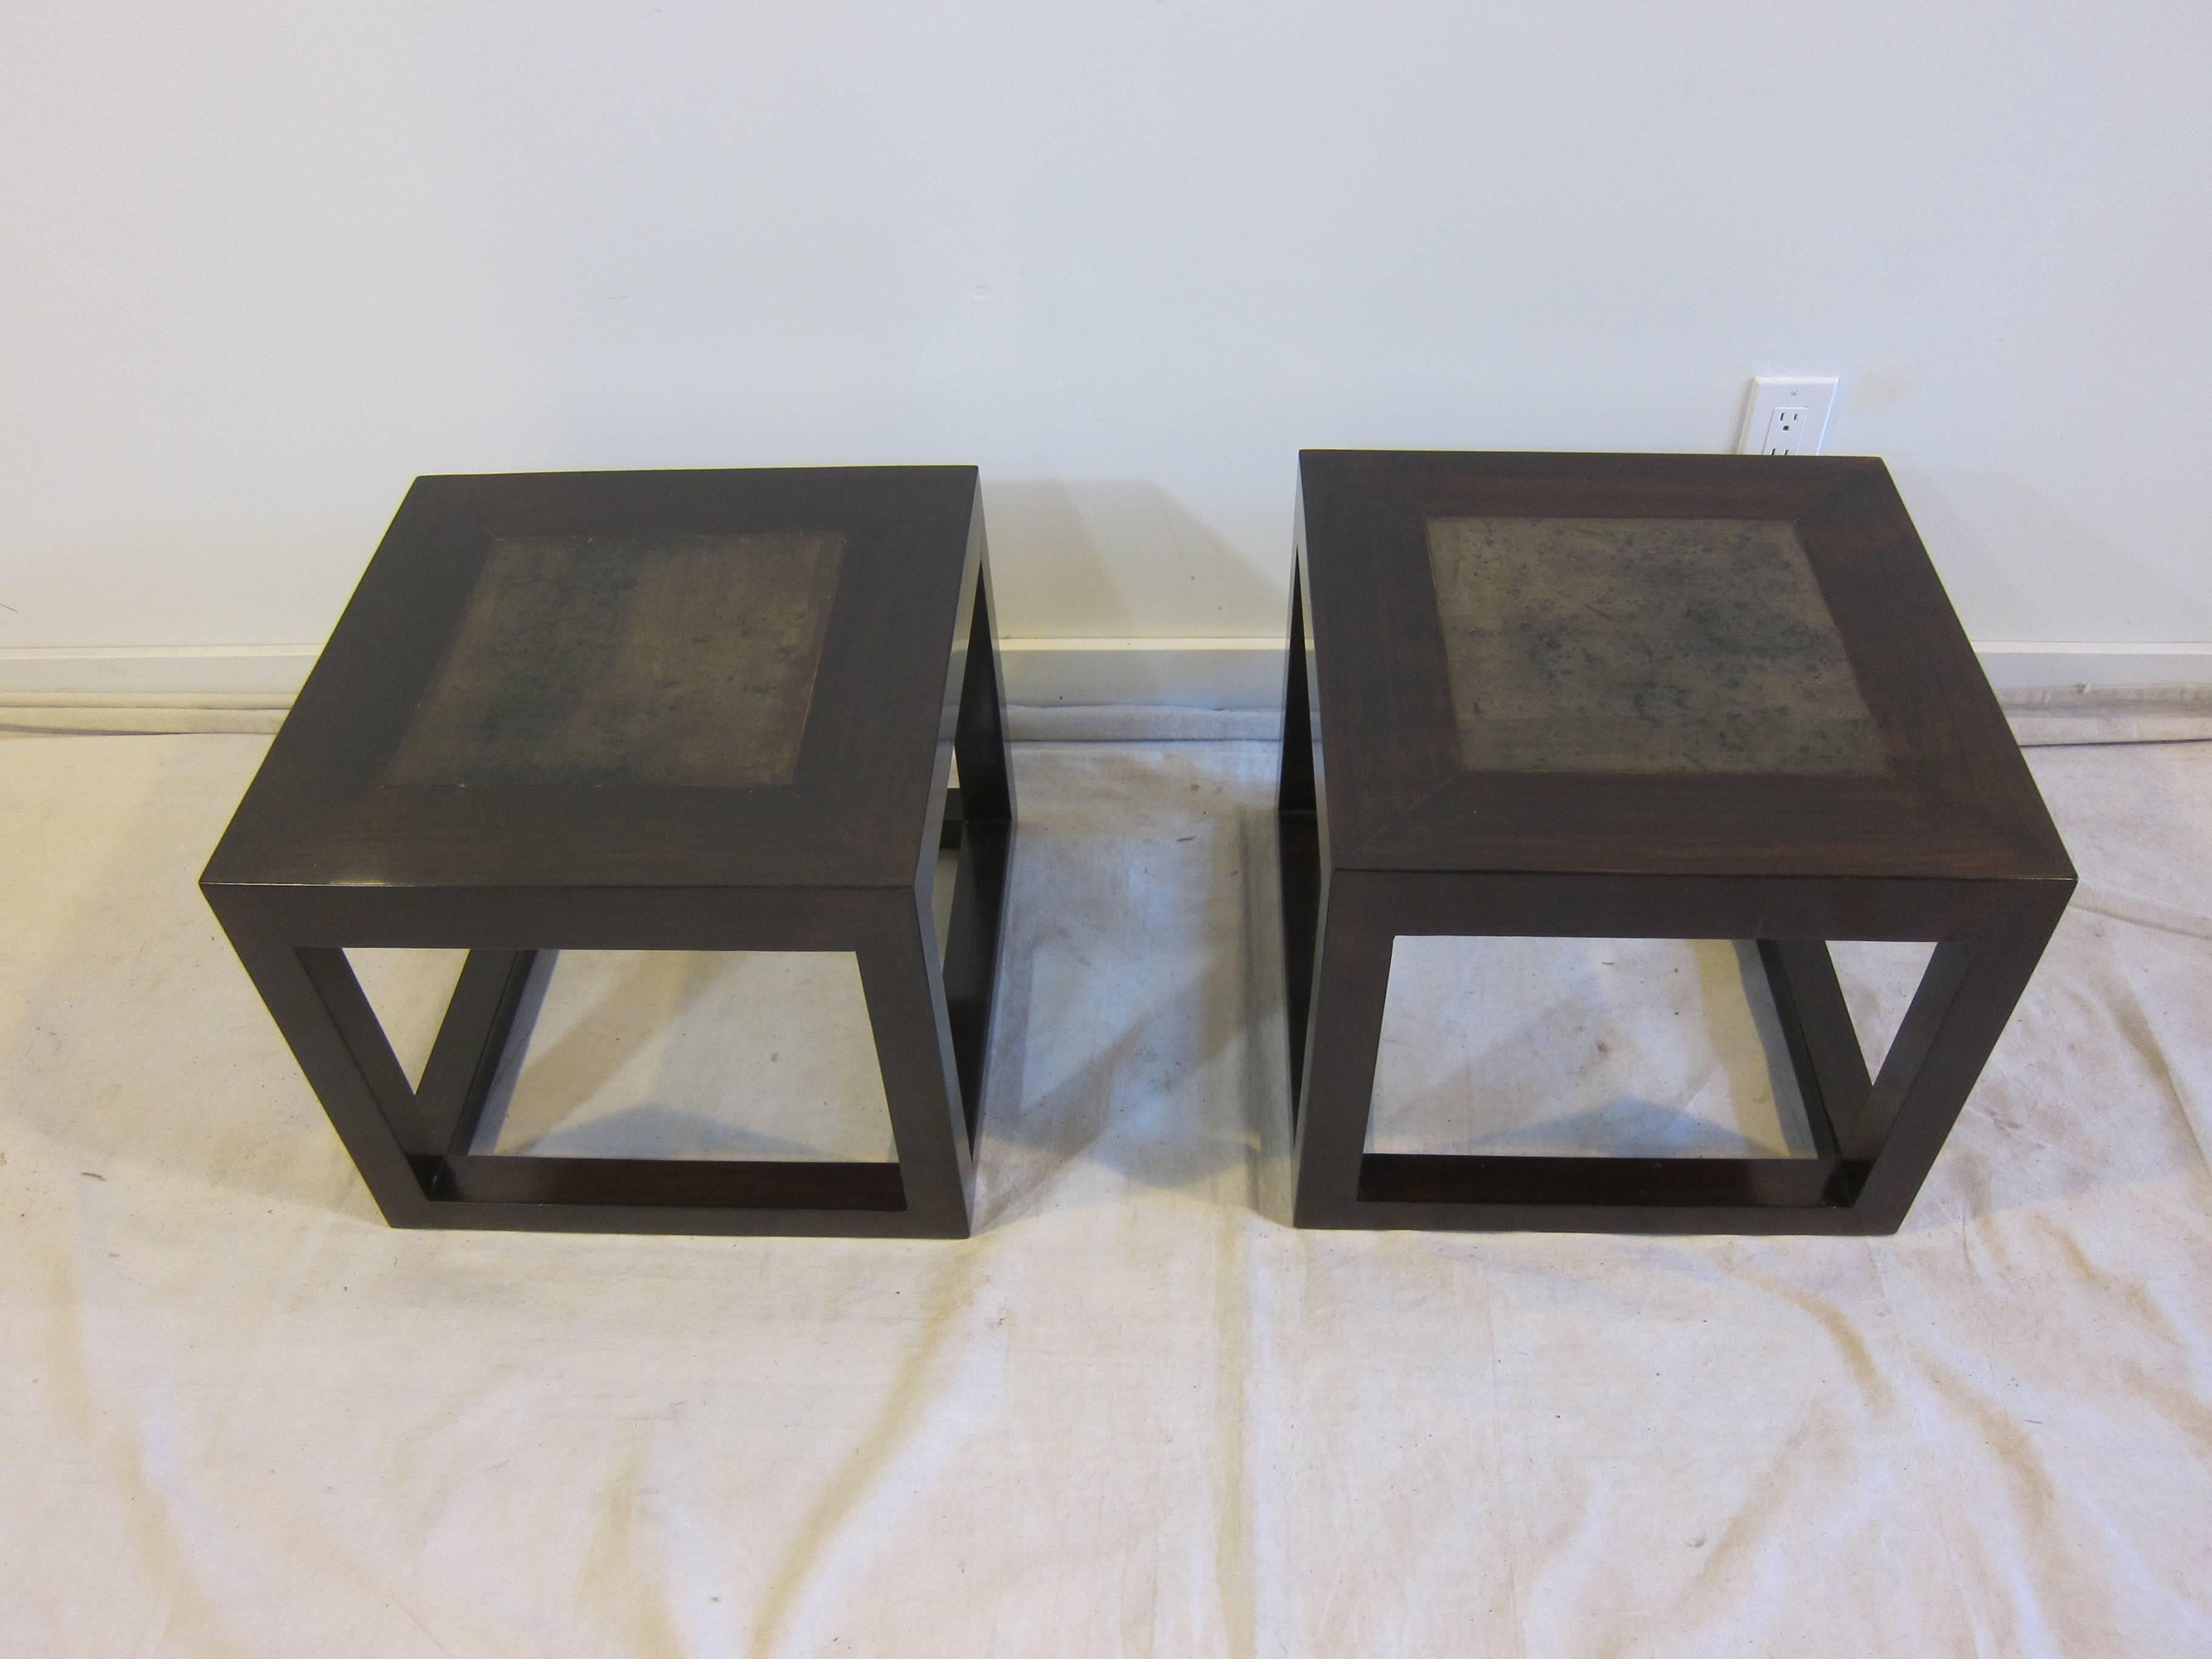 A pair of elmwood cube tables with inset stone tops. Very good condition, one top has a small indentation pictured. Color dark brown to walnut.
Can be used together as one table or as individual side tables.  Square side tables, end tables with